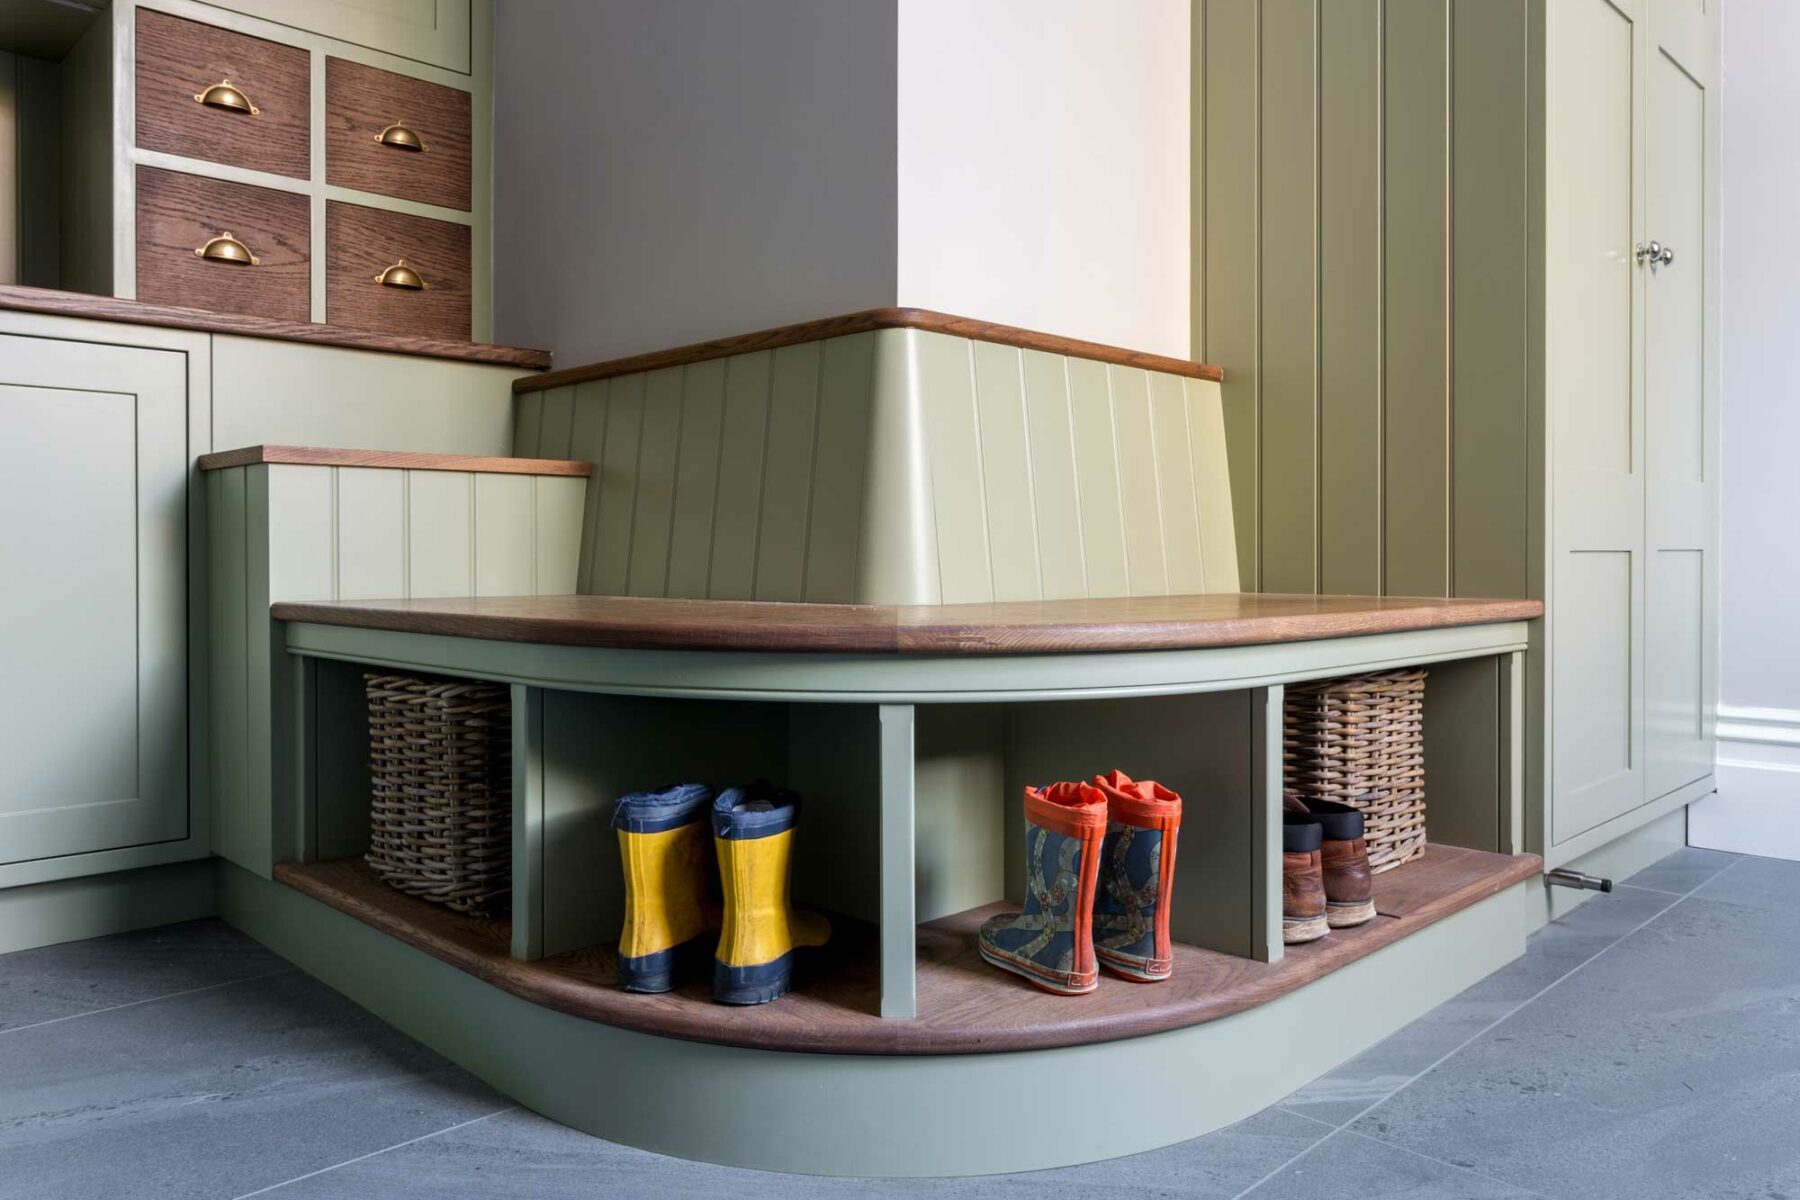 Curved seating area in boot room with wooden wall panelling